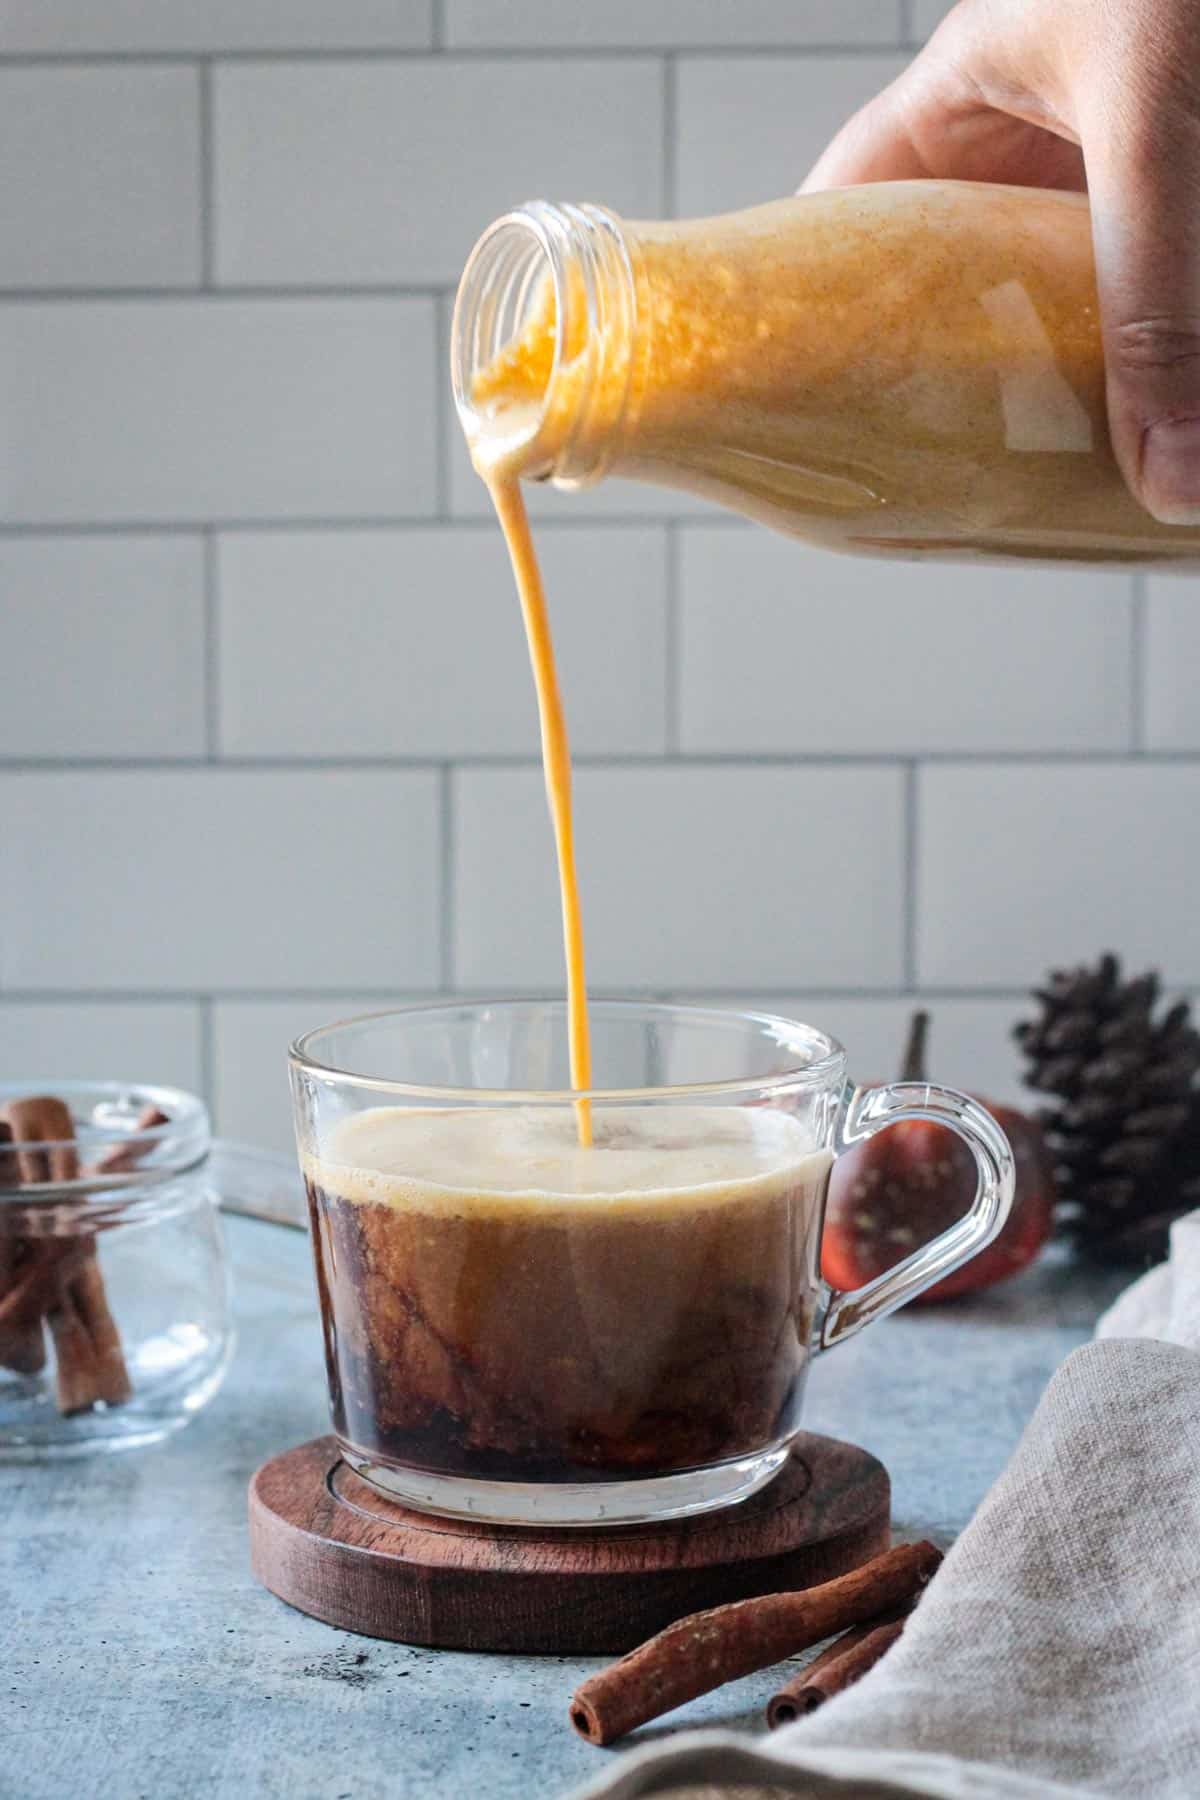 Pumpkin spice creamer being poured into a glass coffee cup.